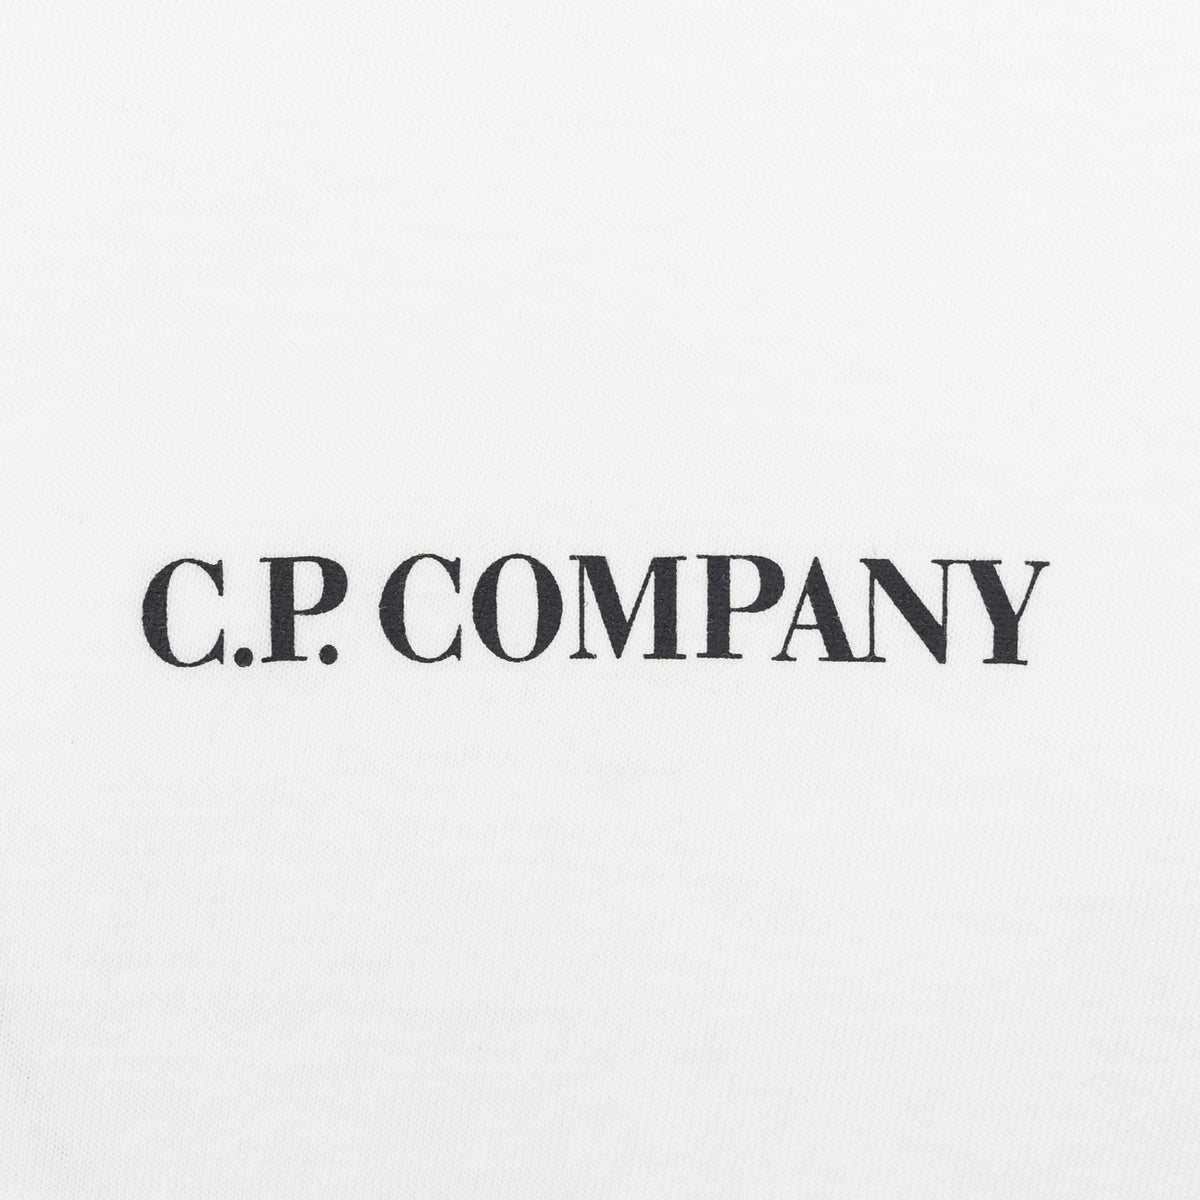 Load image into Gallery viewer, C.P. Company Gauze White 30/1 Centre Logo Tee
